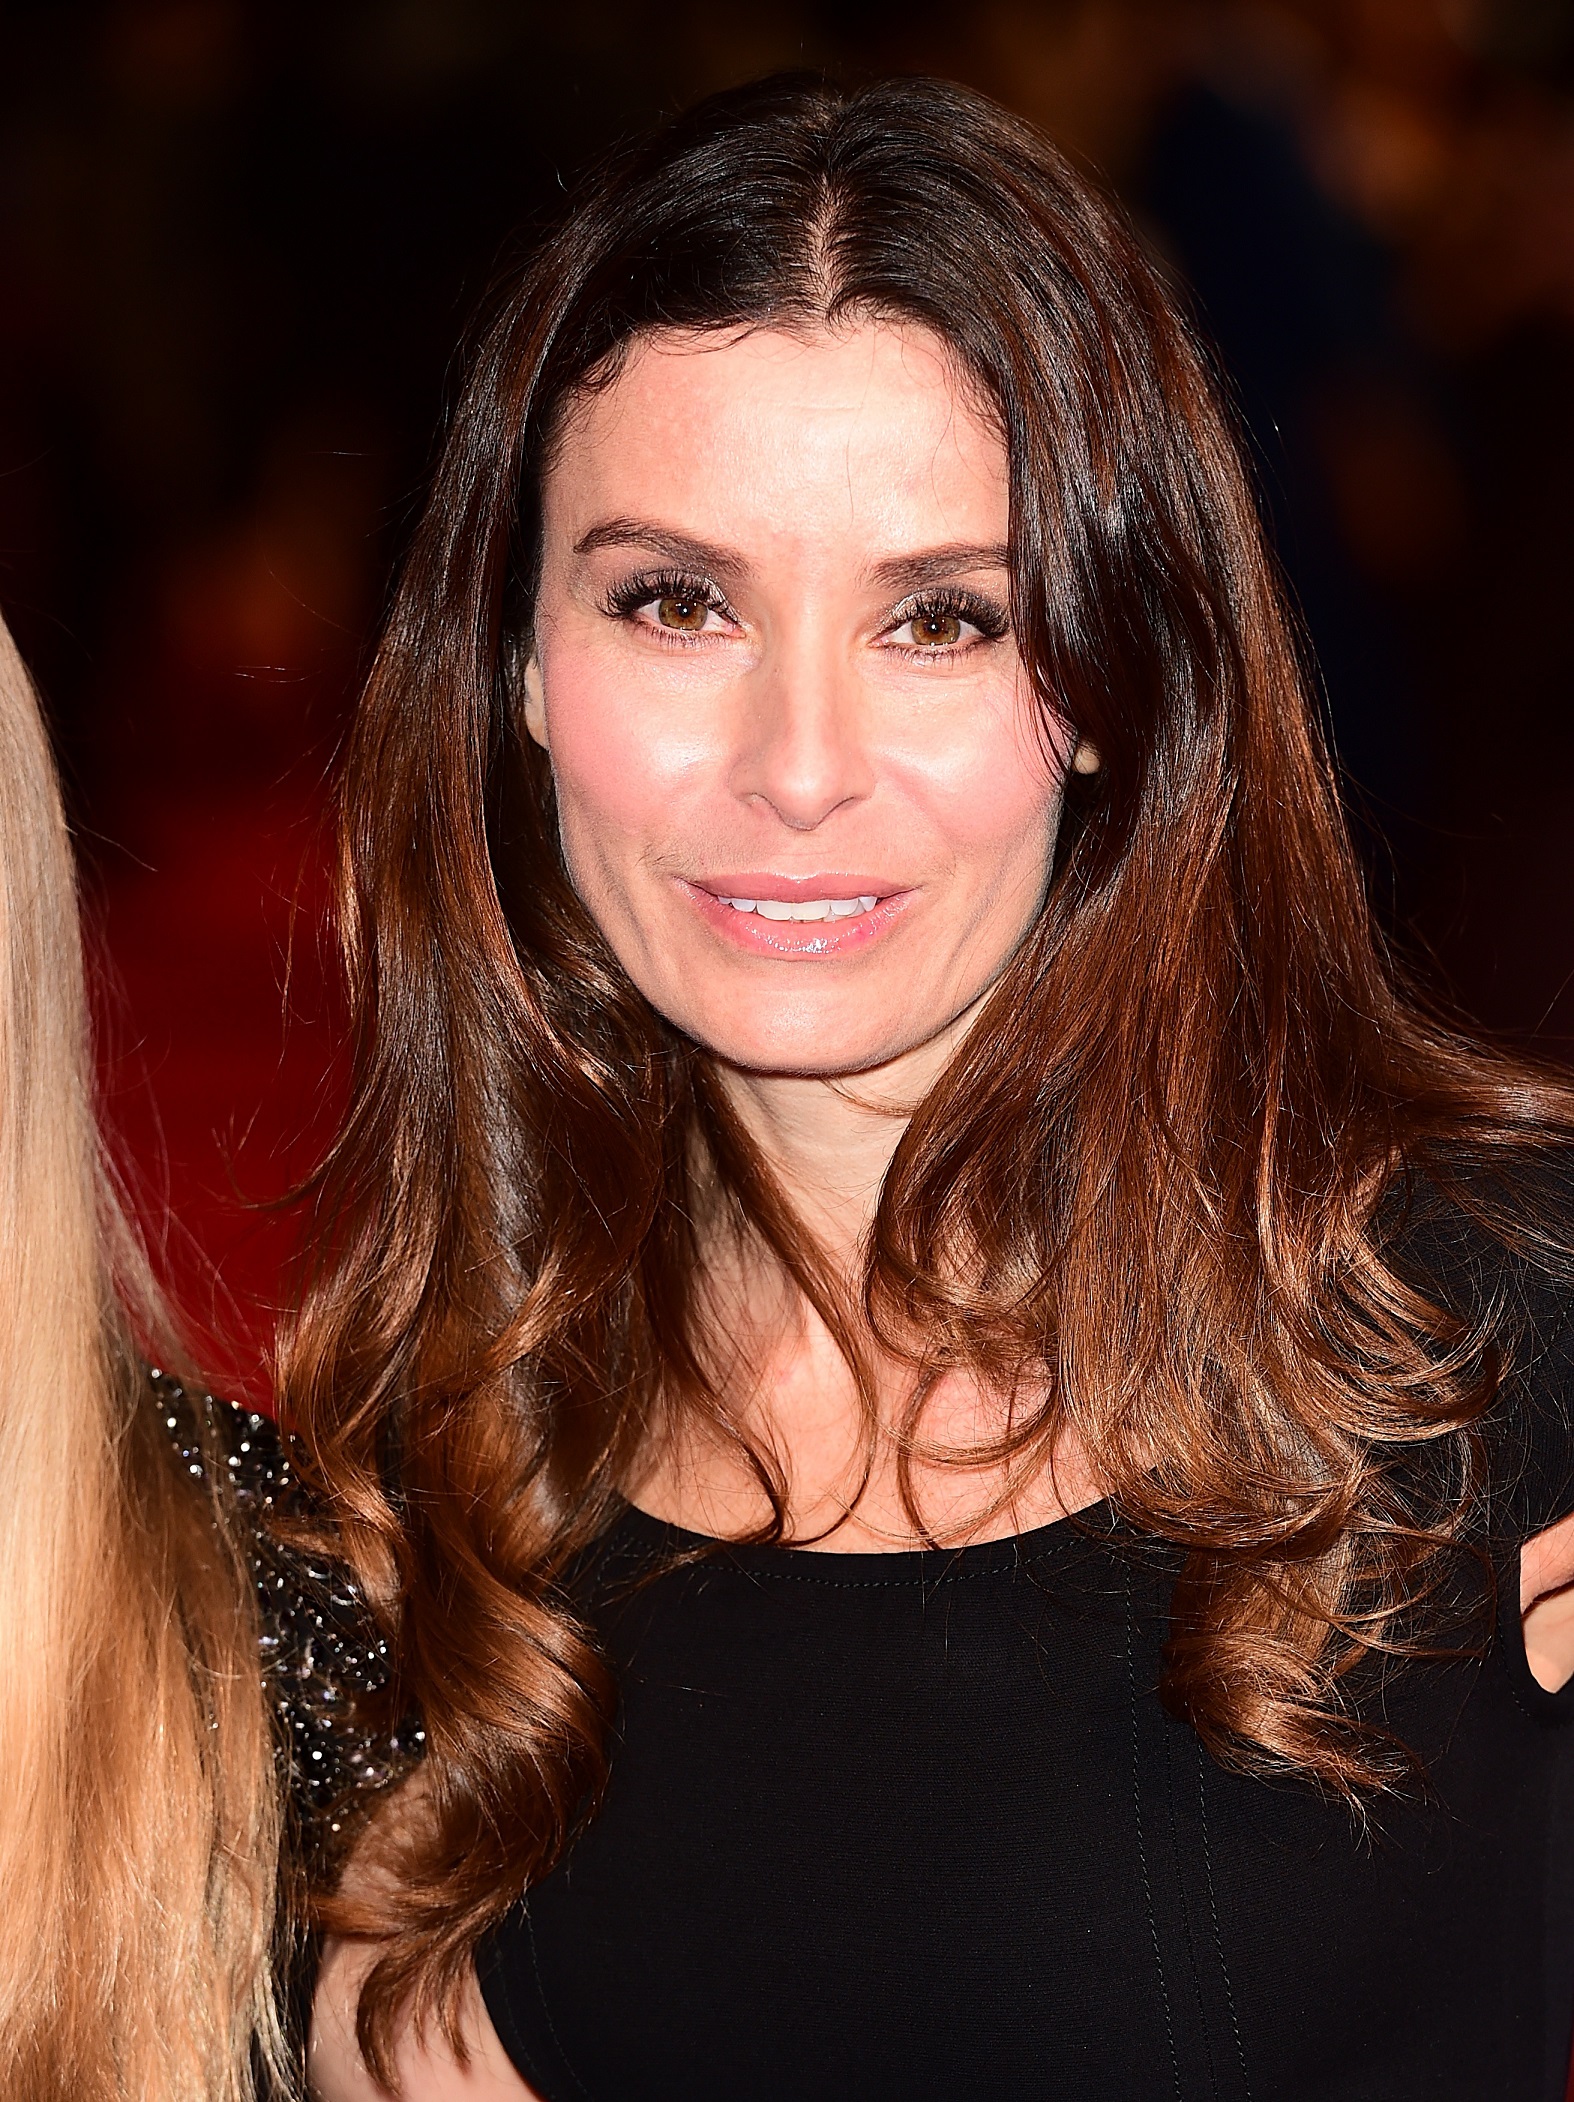 Tana Ramsay arriving for the 2015 National Television Awards (Ian West/PA)